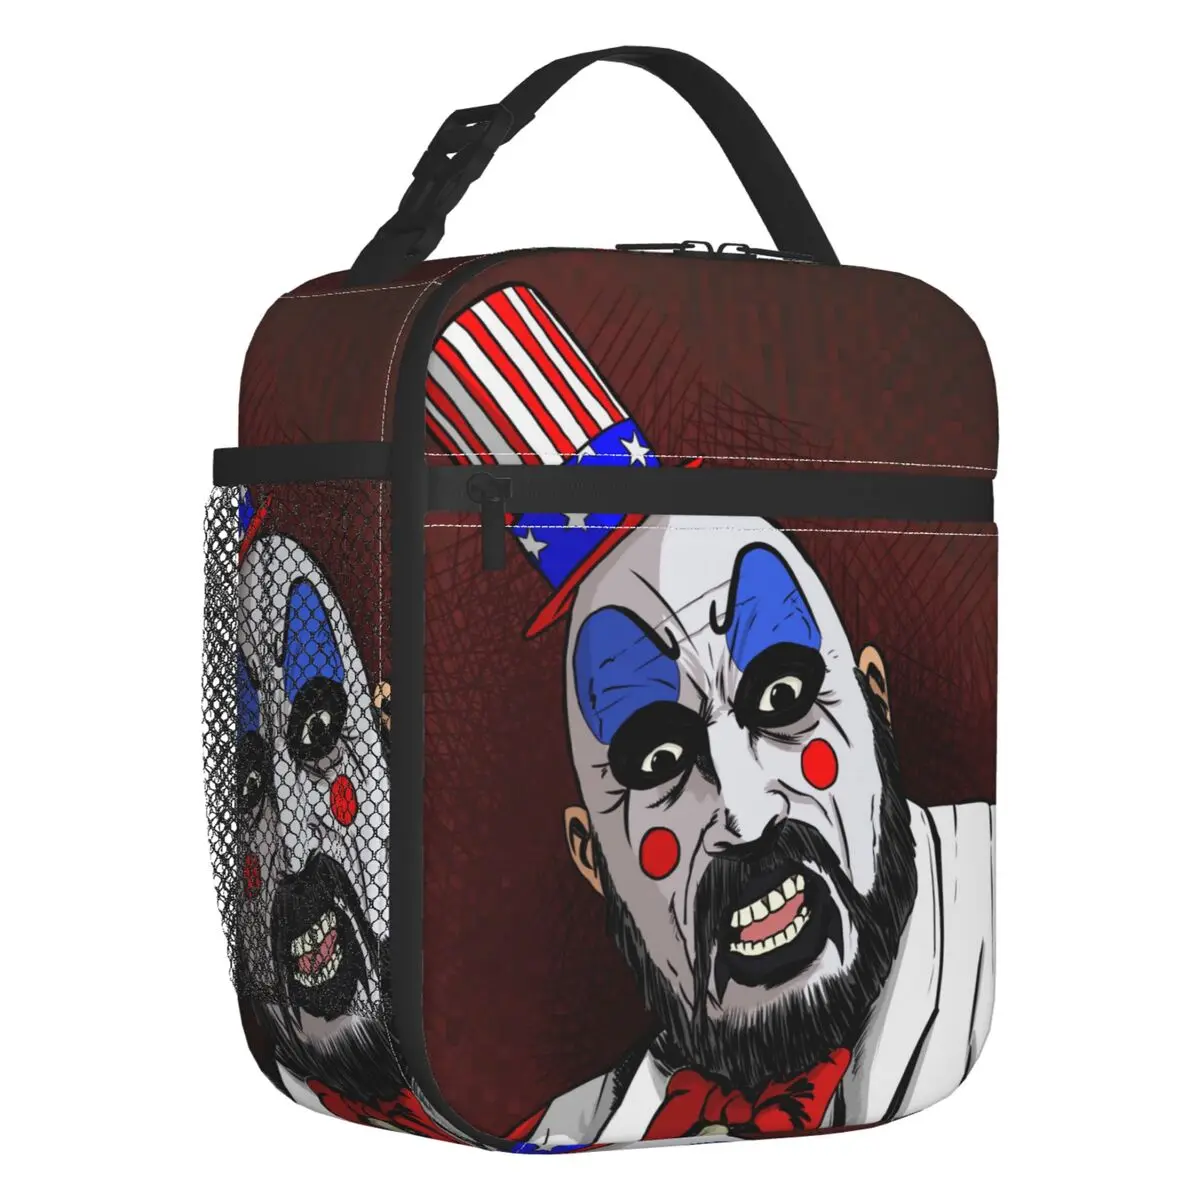 

Captain Spaulding Lunch Box Leakproof House of 1000 Corpses Cooler Thermal Food Insulated Lunch Bag Kids School Children